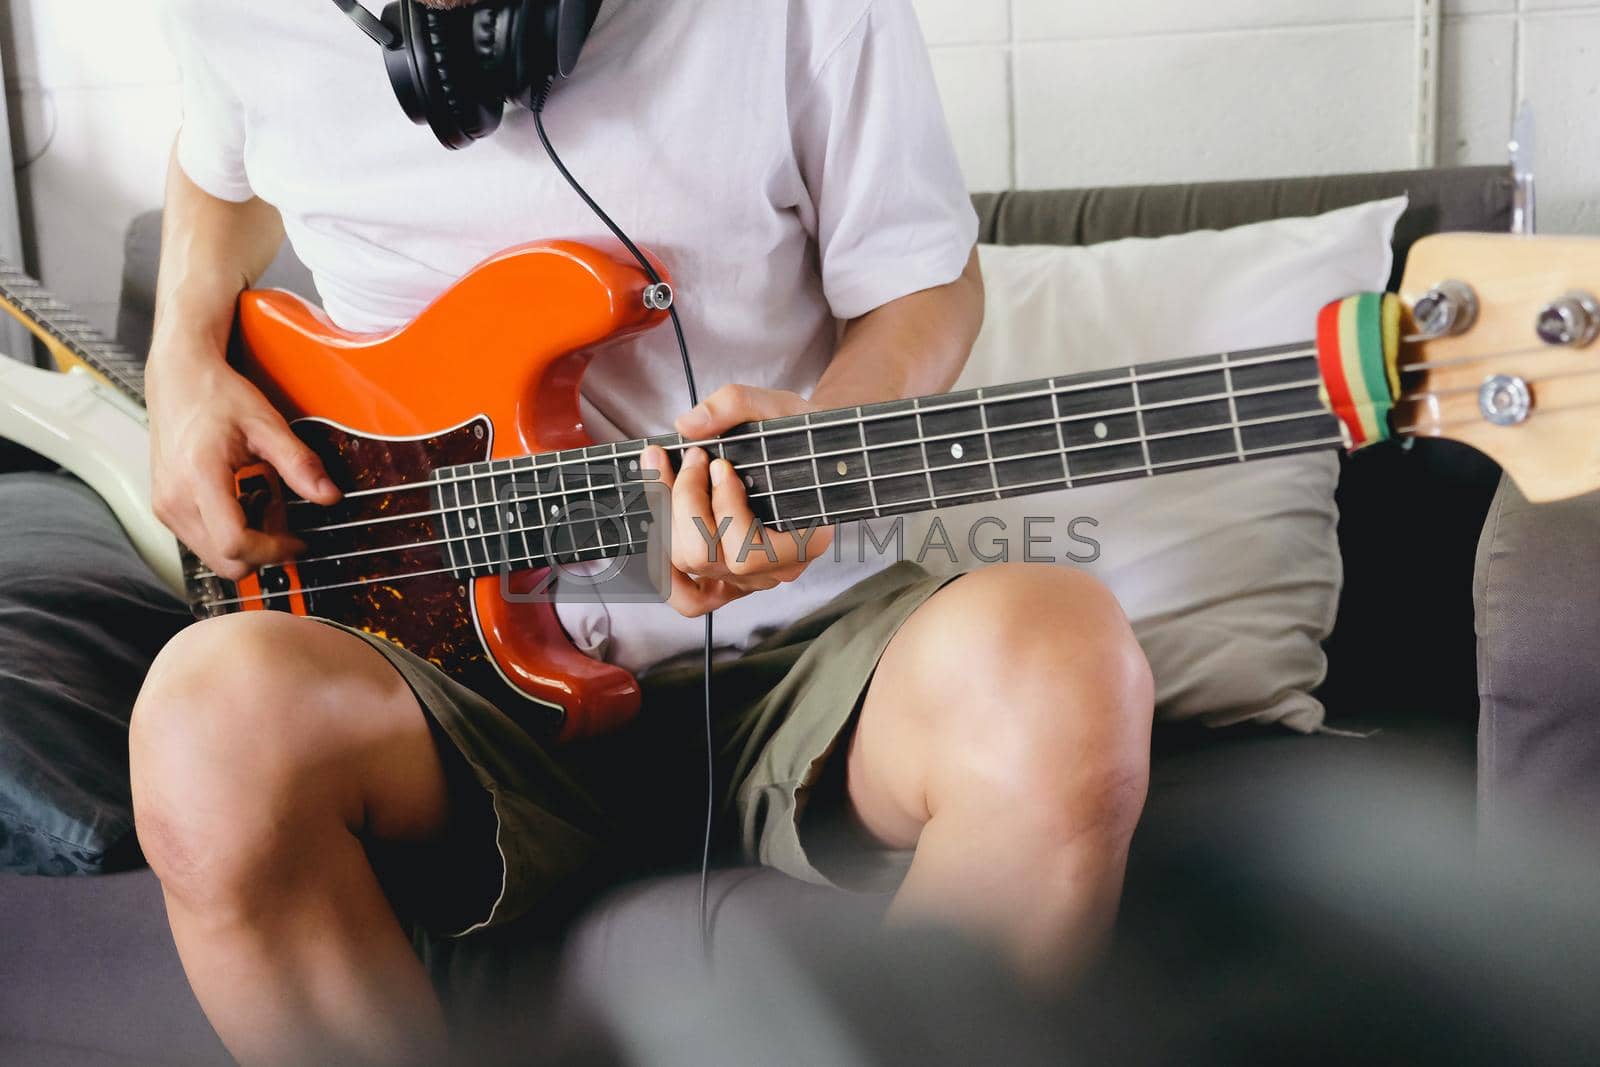 Royalty free image of Musician playing bass guitar by ponsulak